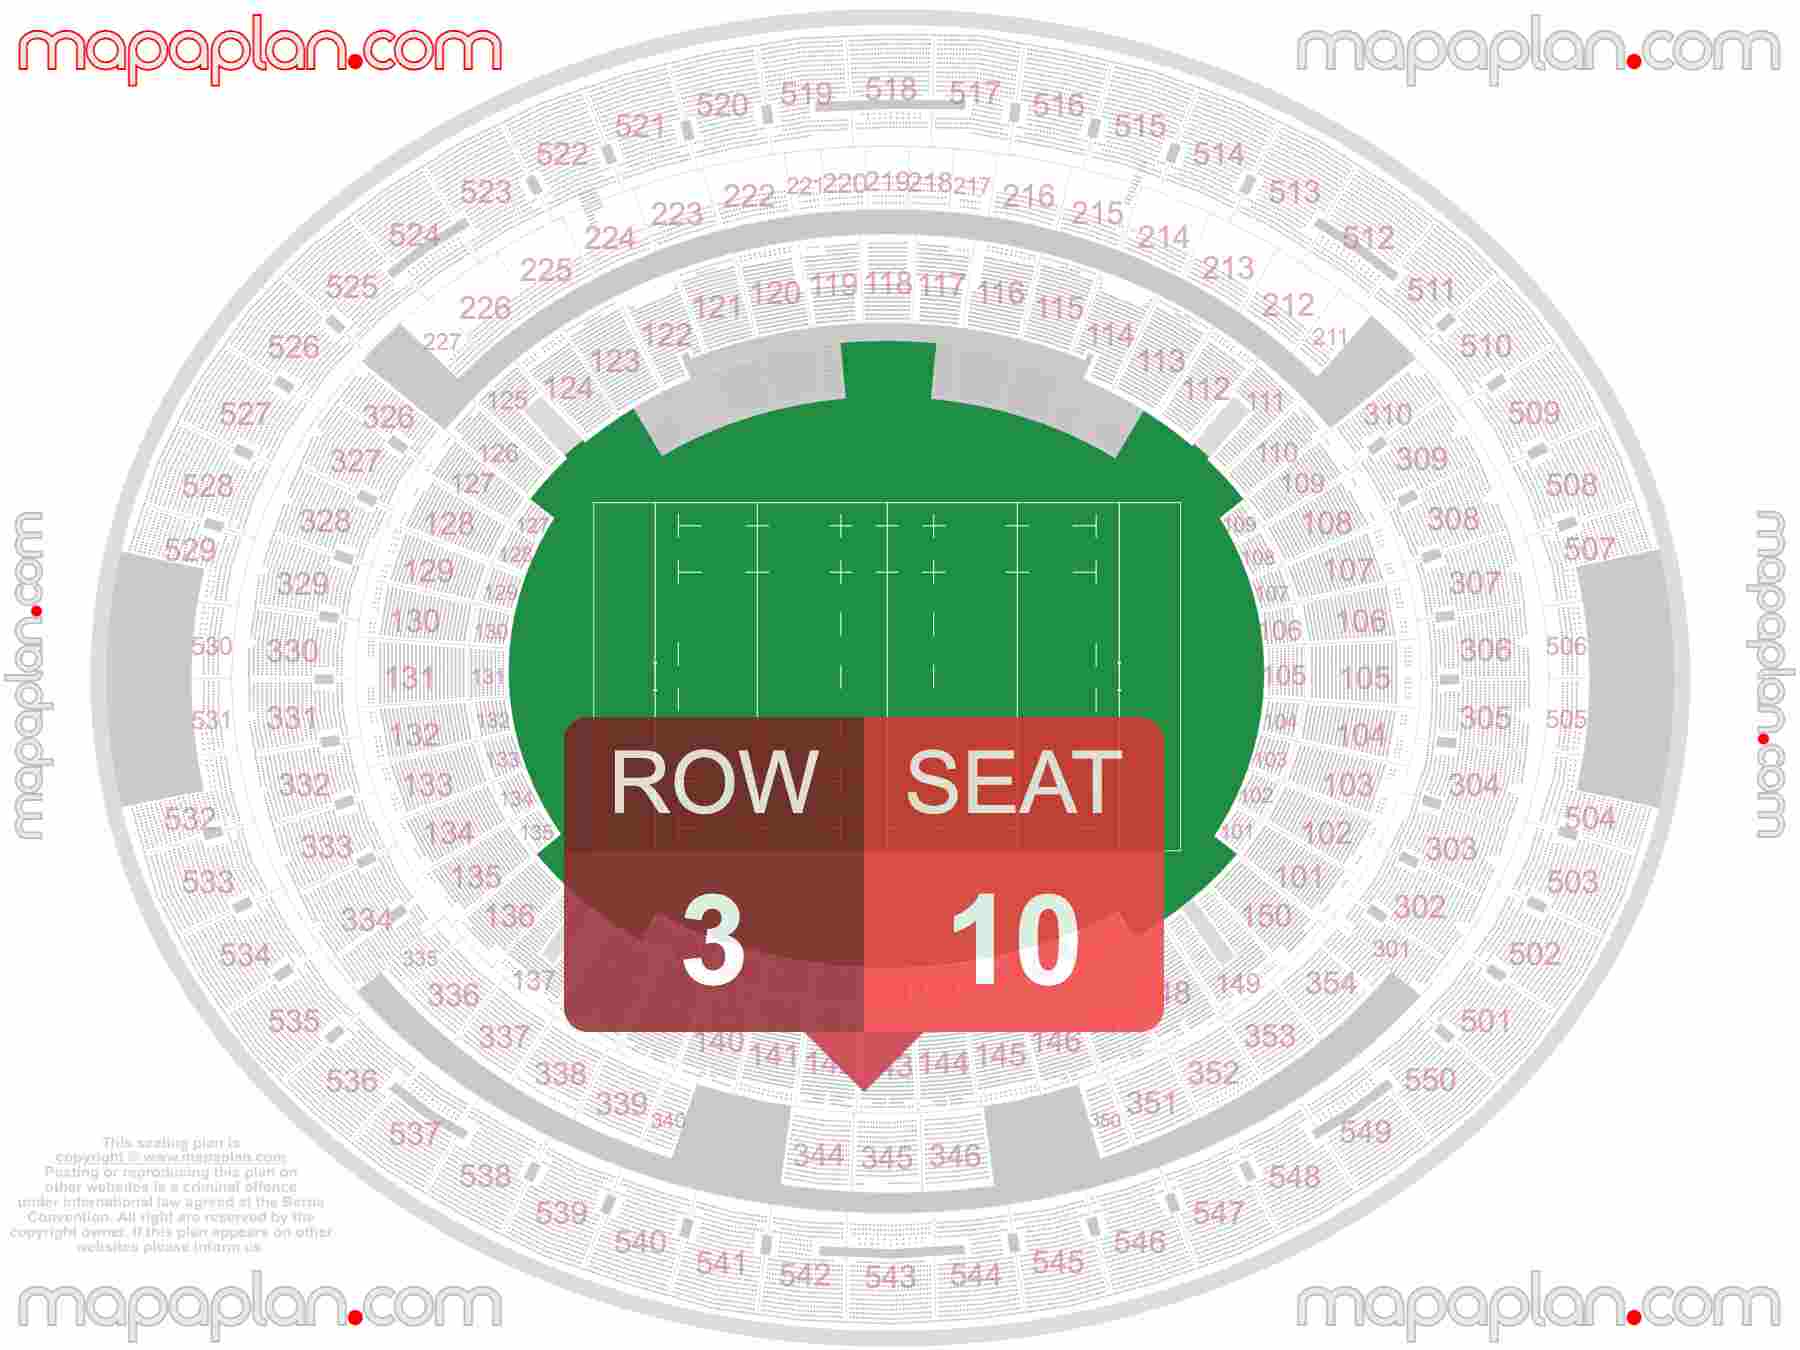 Perth Optus Stadium seating map Rugby inside capacity view arrangement plan - Interactive virtual 3d best seats & rows detailed stadium image configuration layout